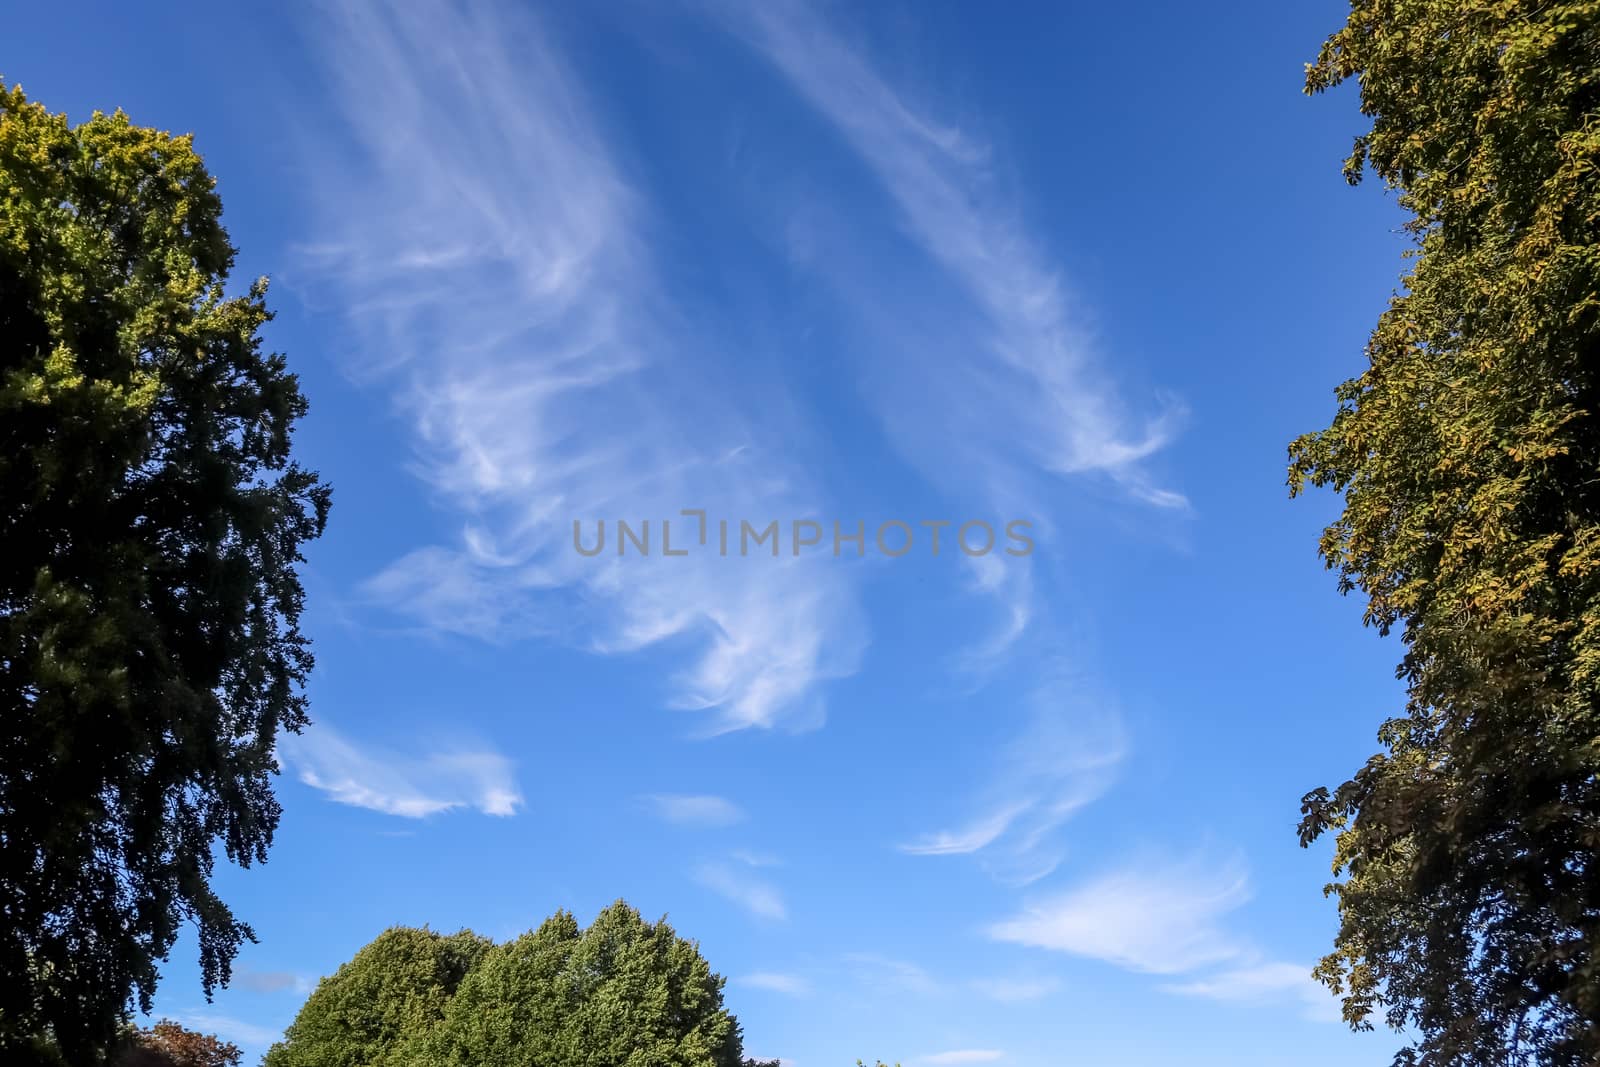 Stunning cirrus cloud formation panorama in a deep blue sky by MP_foto71